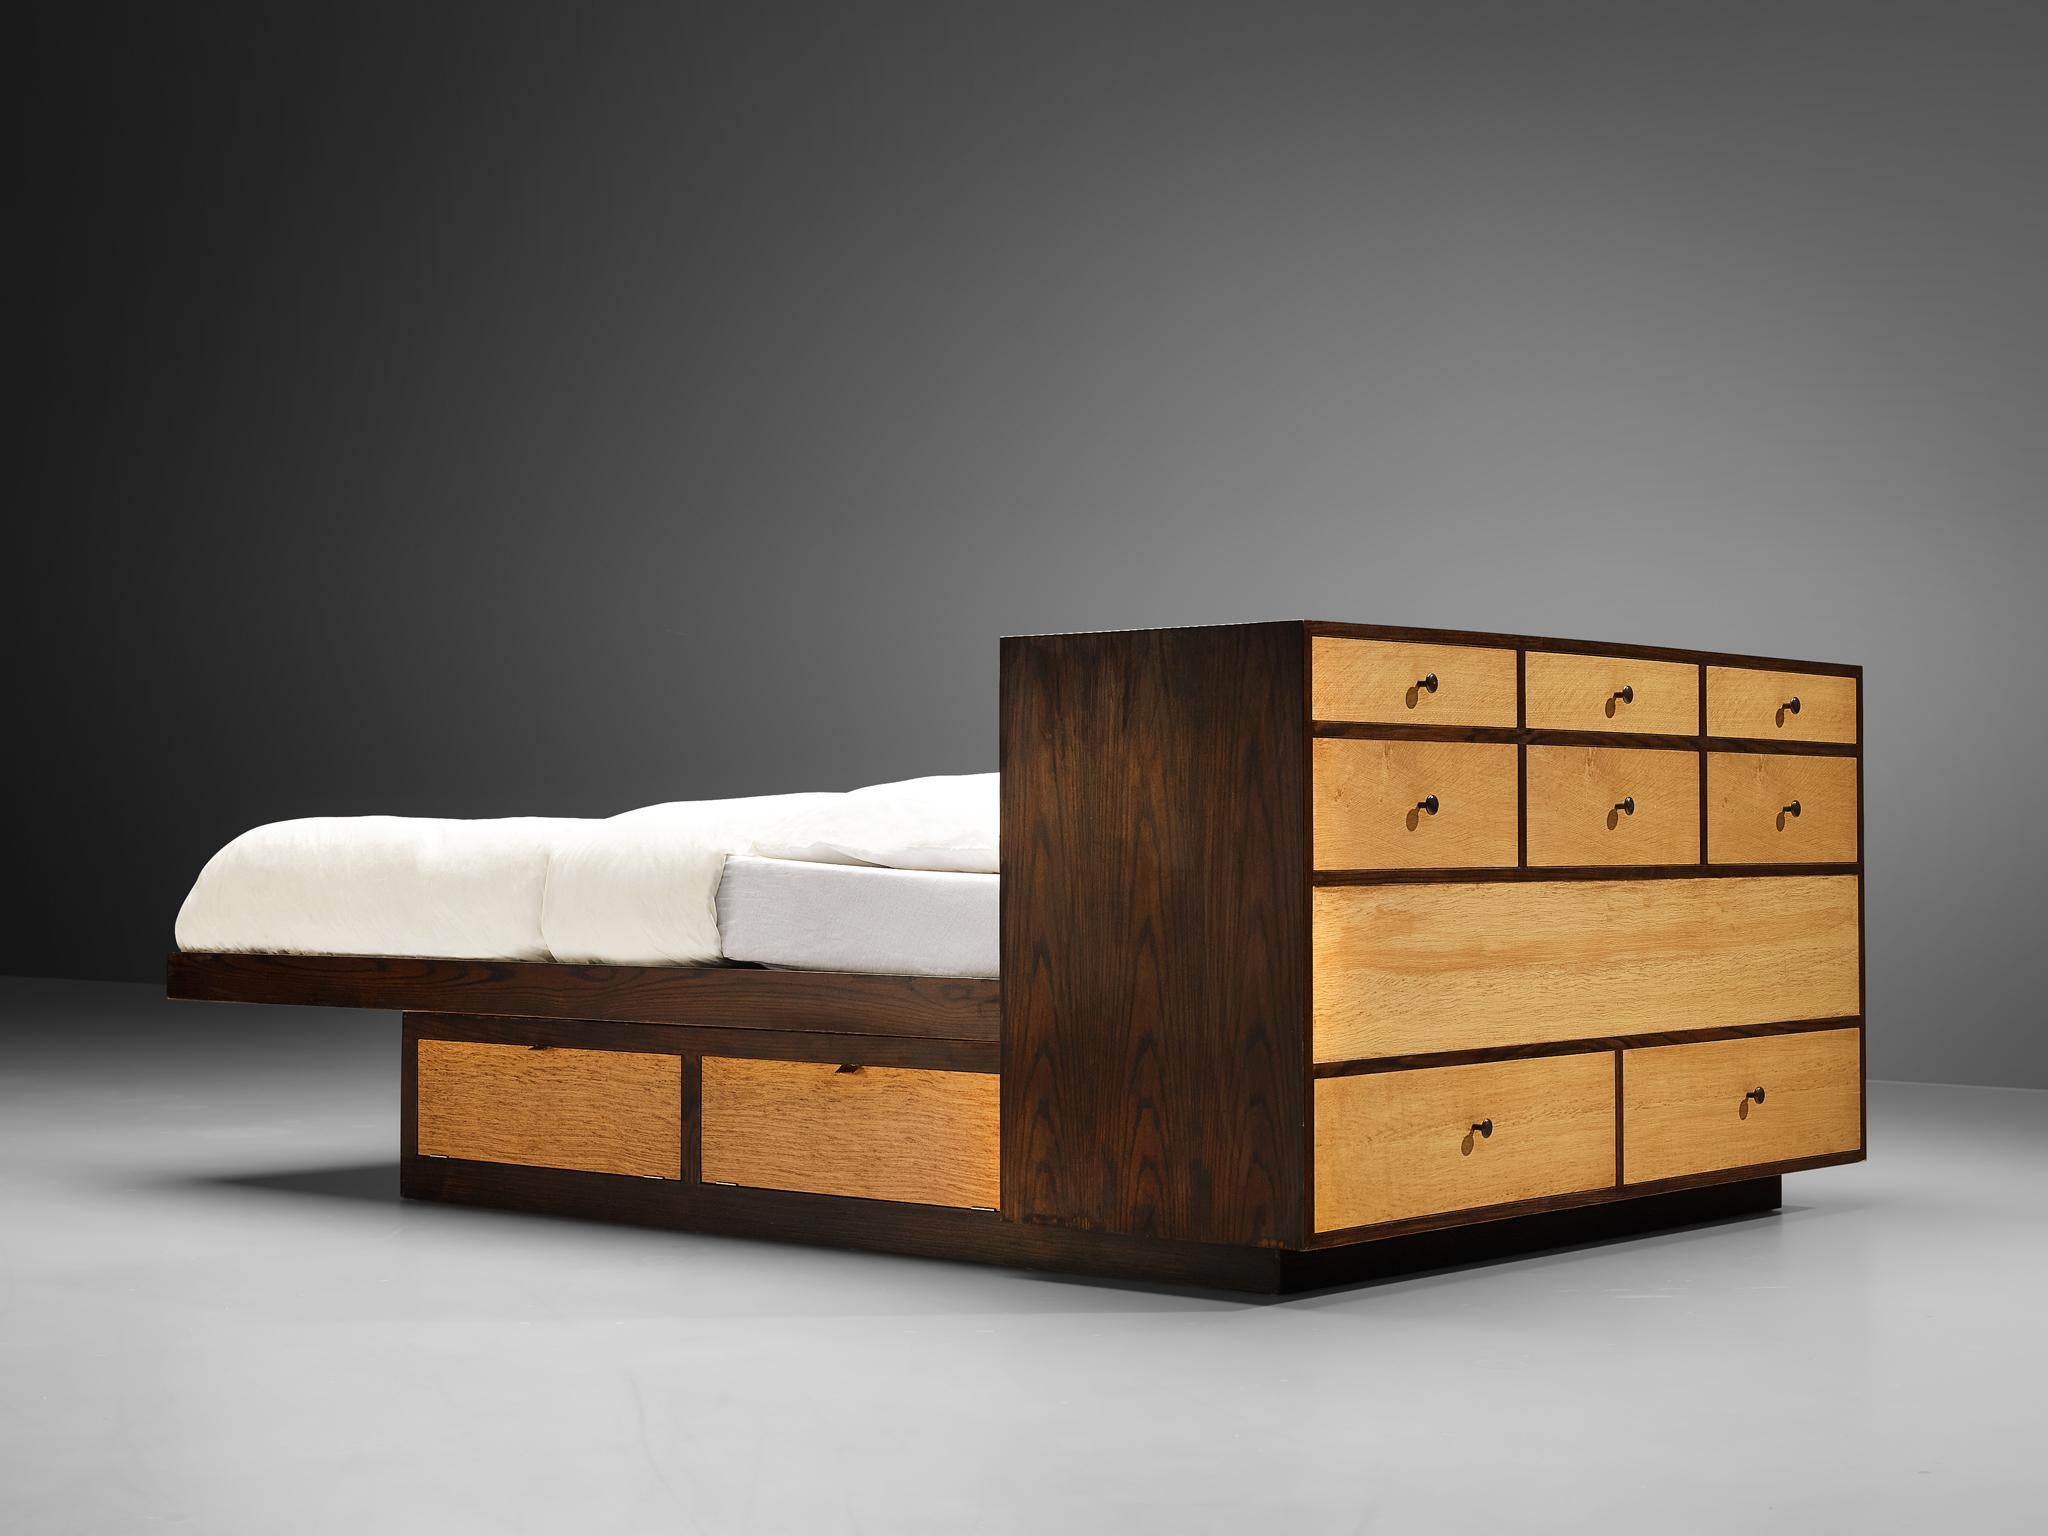 Edward Wormley for Dunbar, queen size bed with drawers, oak, leather, brass, United States, 1960s

Rare queen-size bed by Edward Wormley for Dunbar designed in the 1960s. This exceptional bed features a wooden frame and large headboard that both